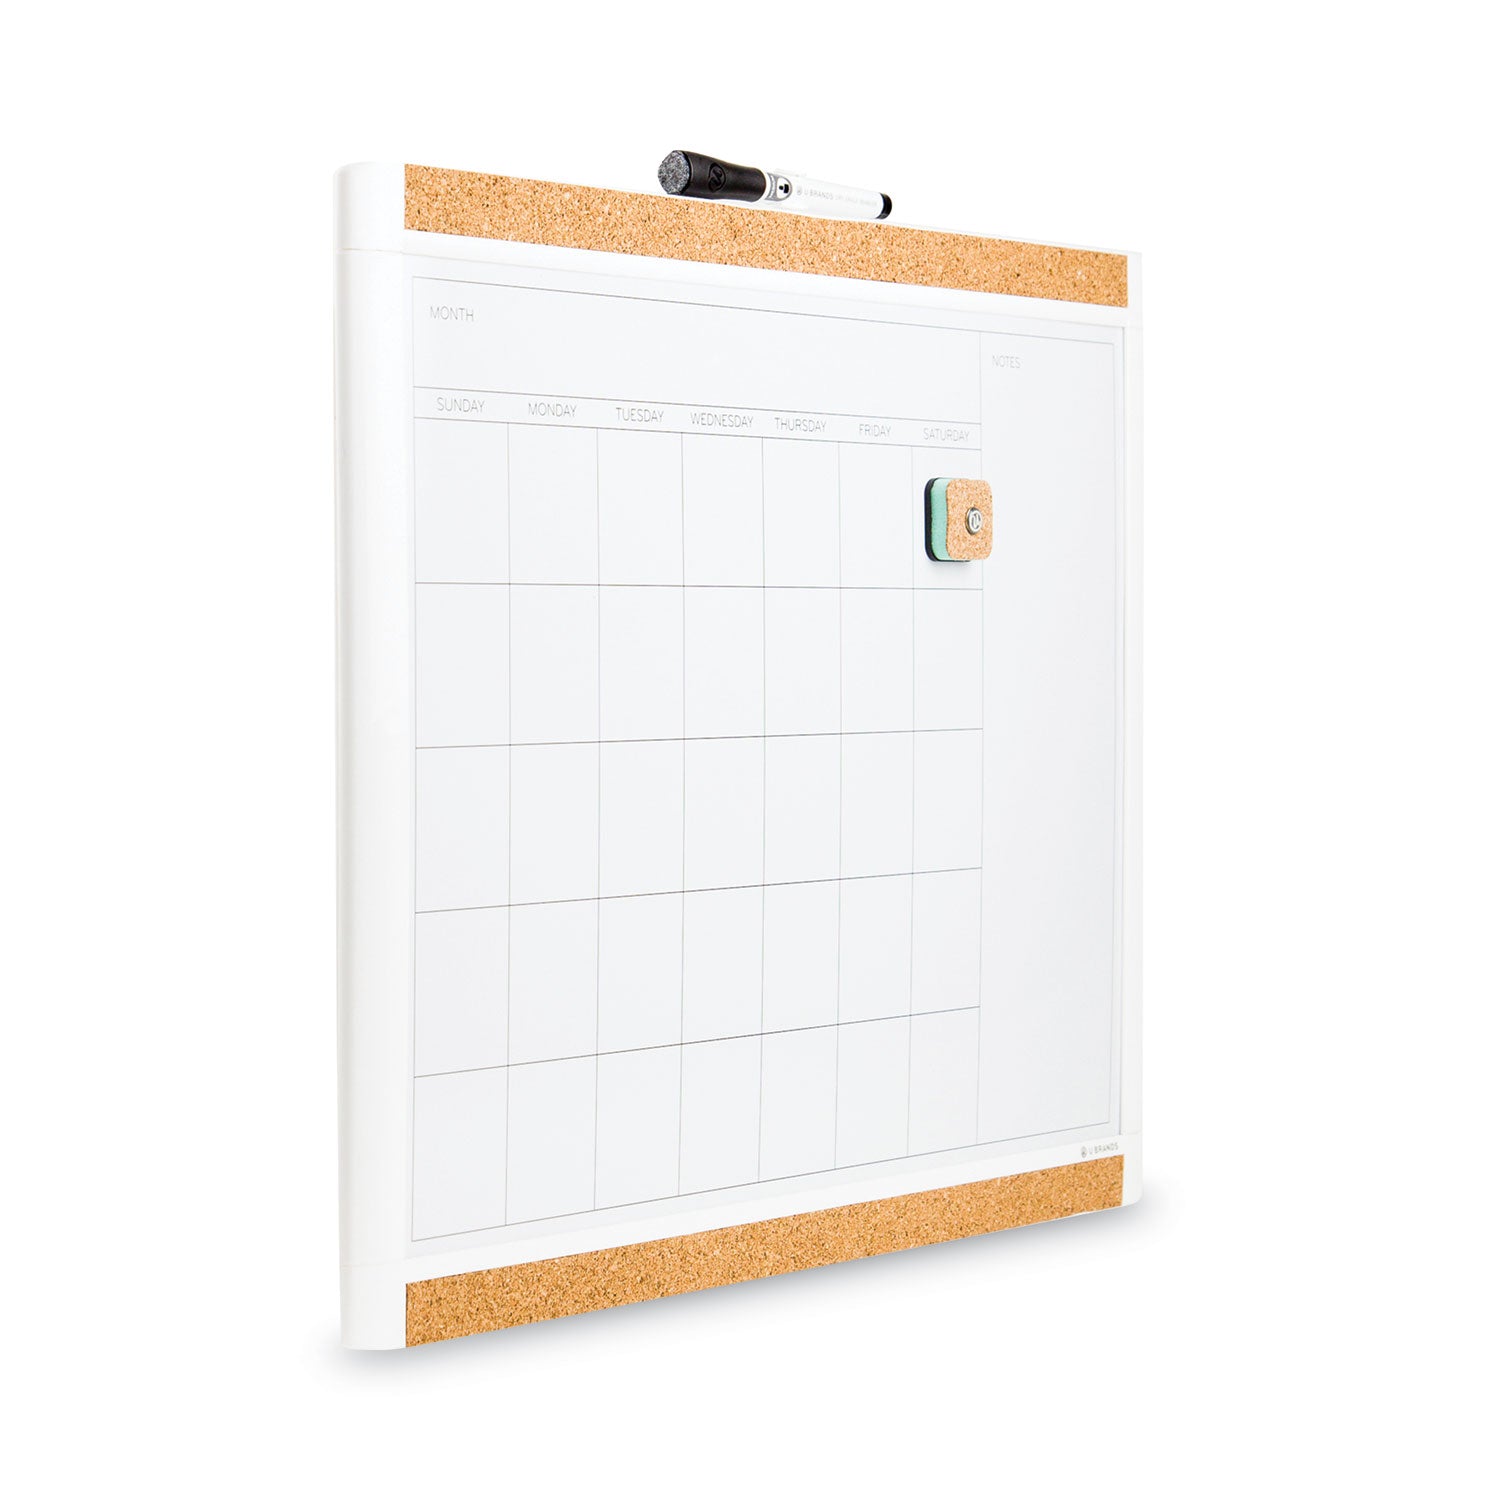 pinit-magnetic-dry-erase-calendar-with-plastic-frame-one-month-20-x-16-white-surface-white-plastic-frame_ubr437u0001 - 2